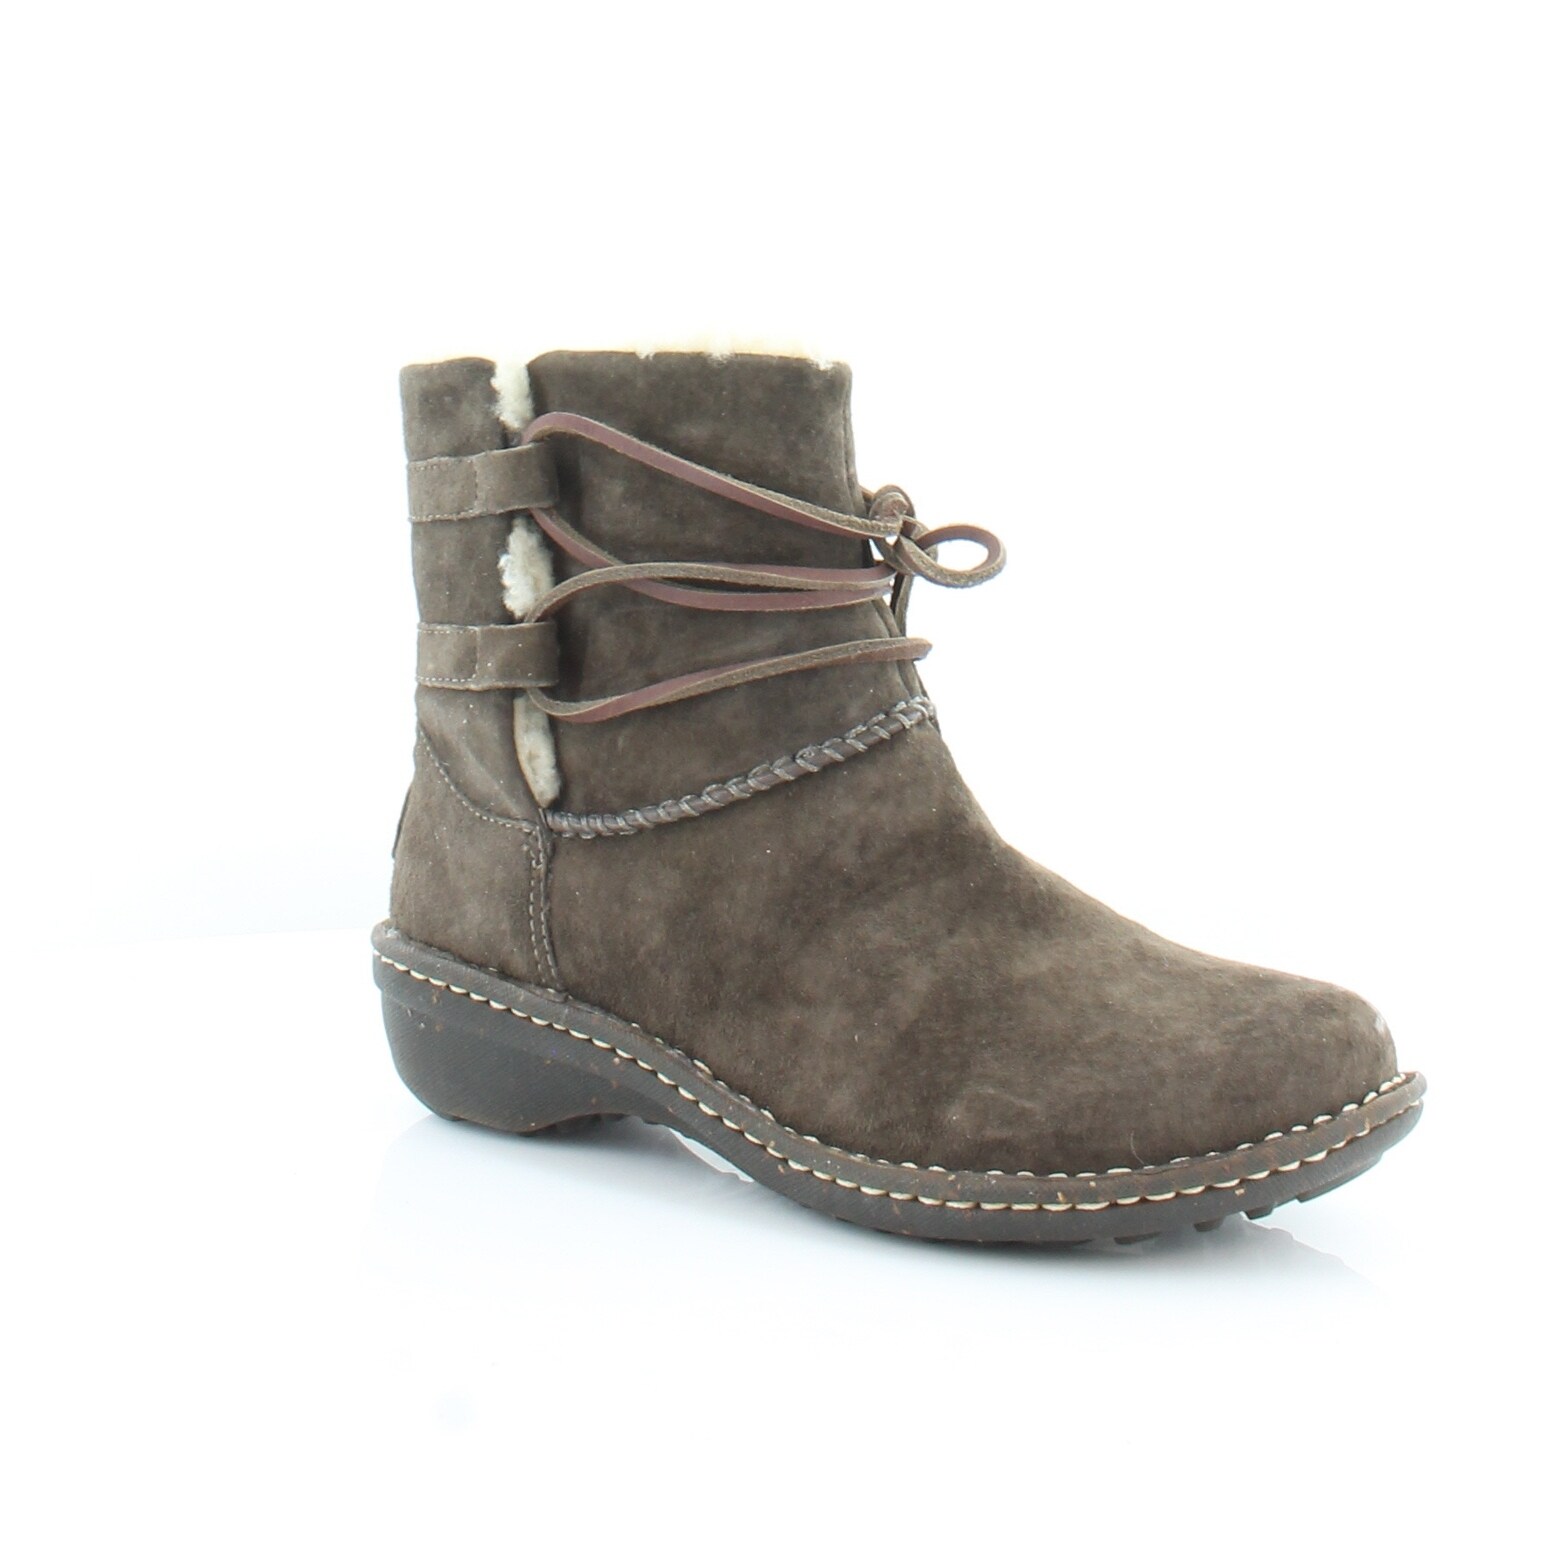 ugg caspia boots size 9